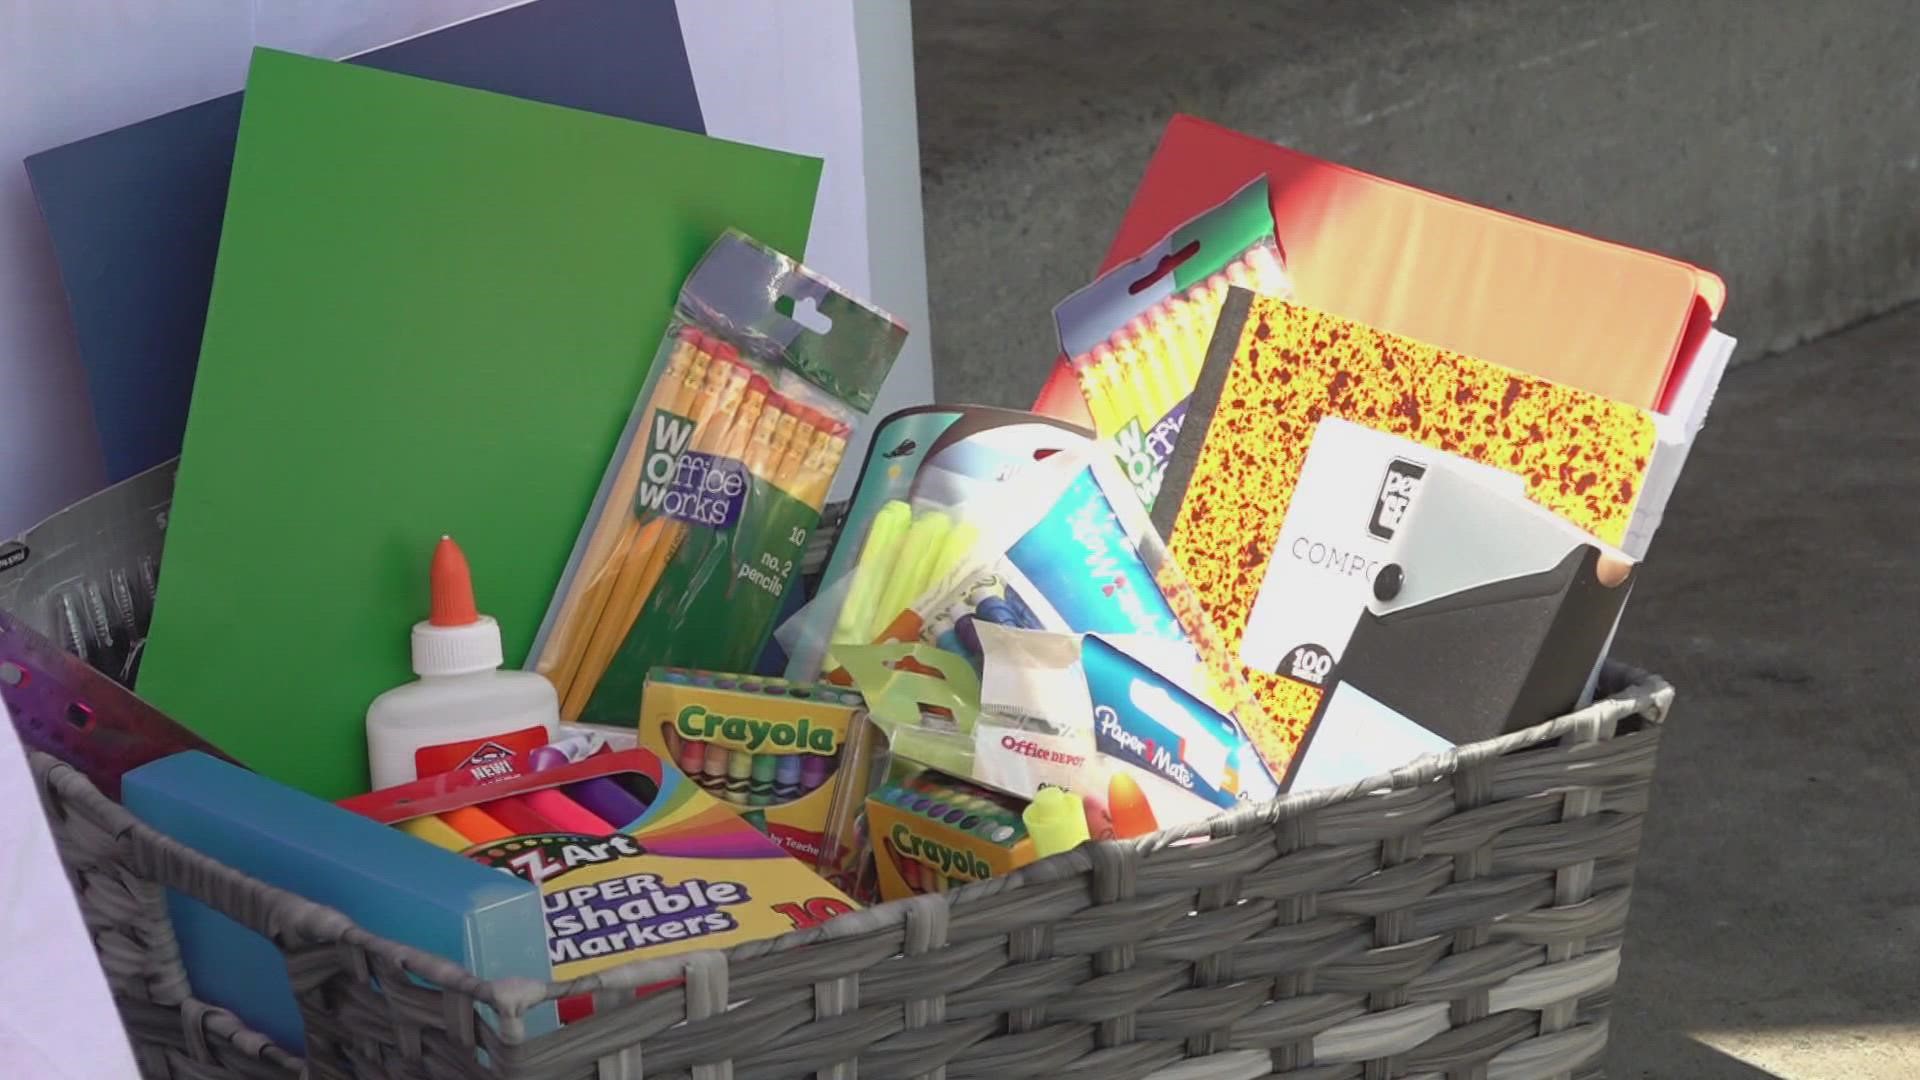 The people of Sevierville came together for a supply drive called "Stuff the Bus" to help students start their year.